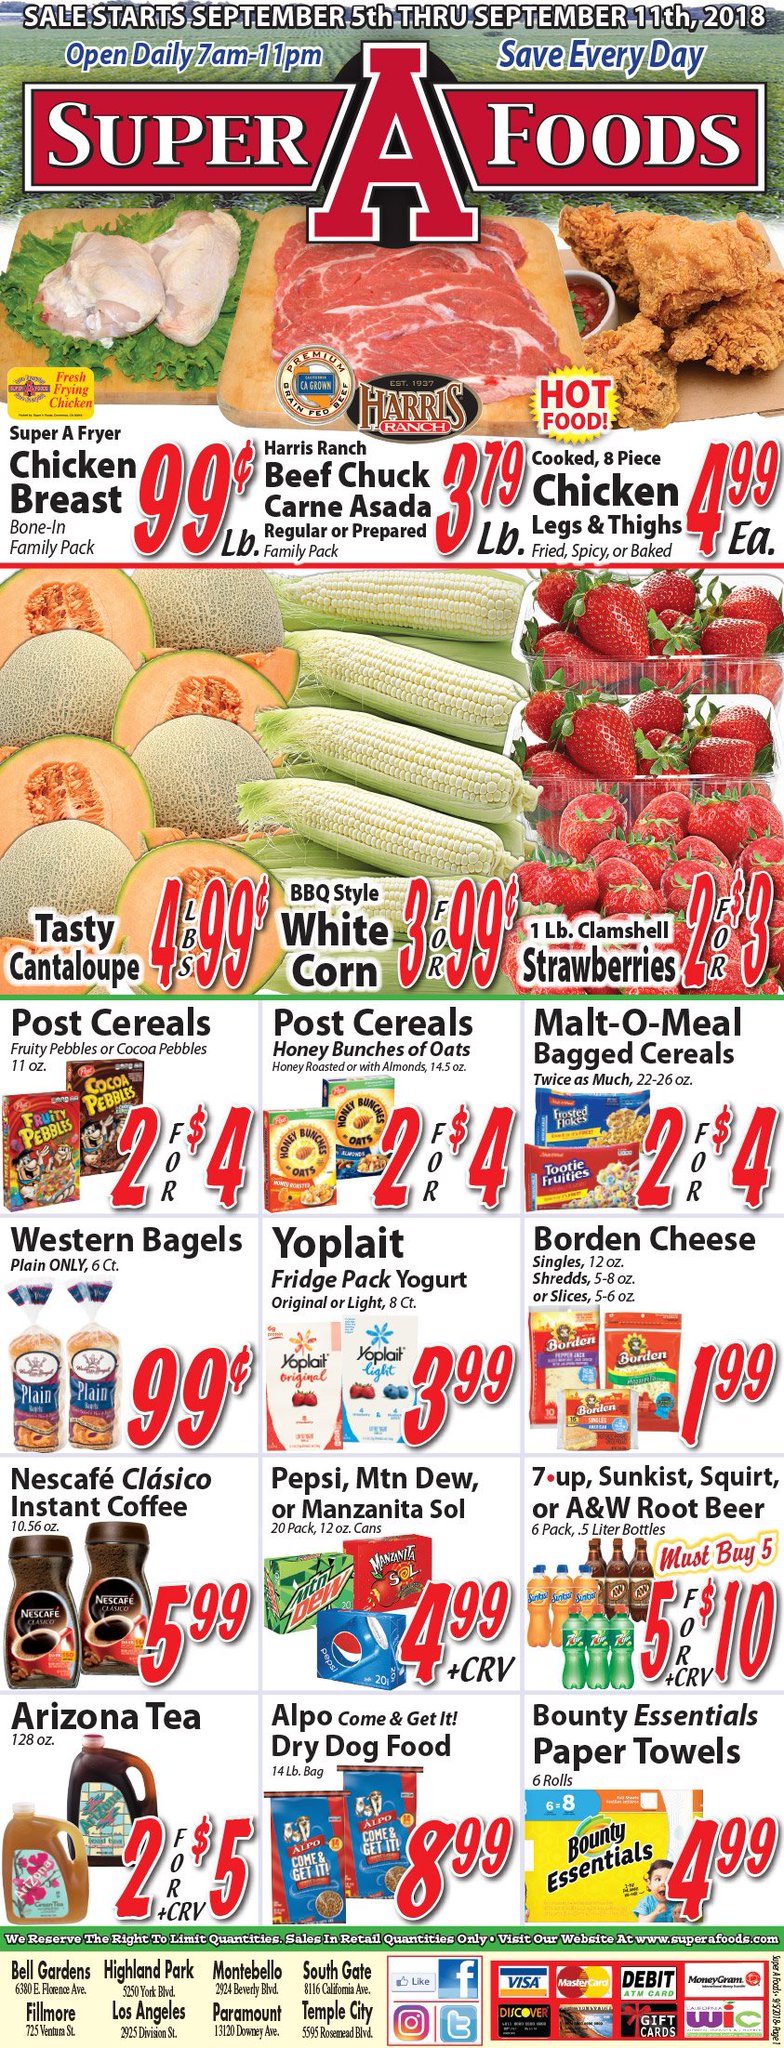 Super A Foods On Twitter This Weeks Ad Is Here 9 5 9 11